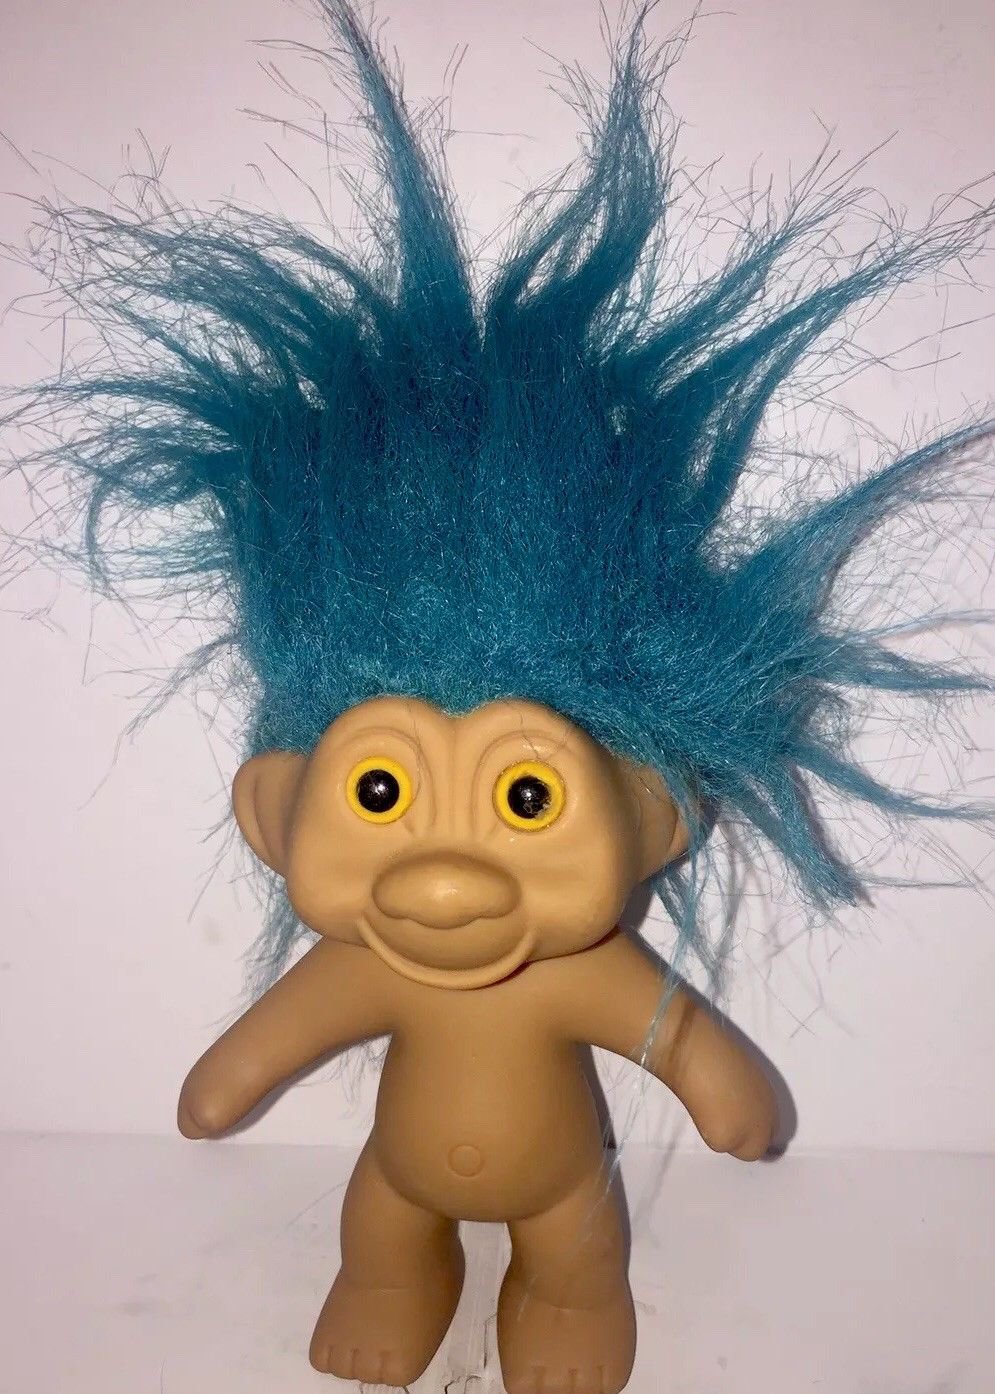 Vintage Troll Doll 1991 Tnt China Teal Blue Hair And Yellow